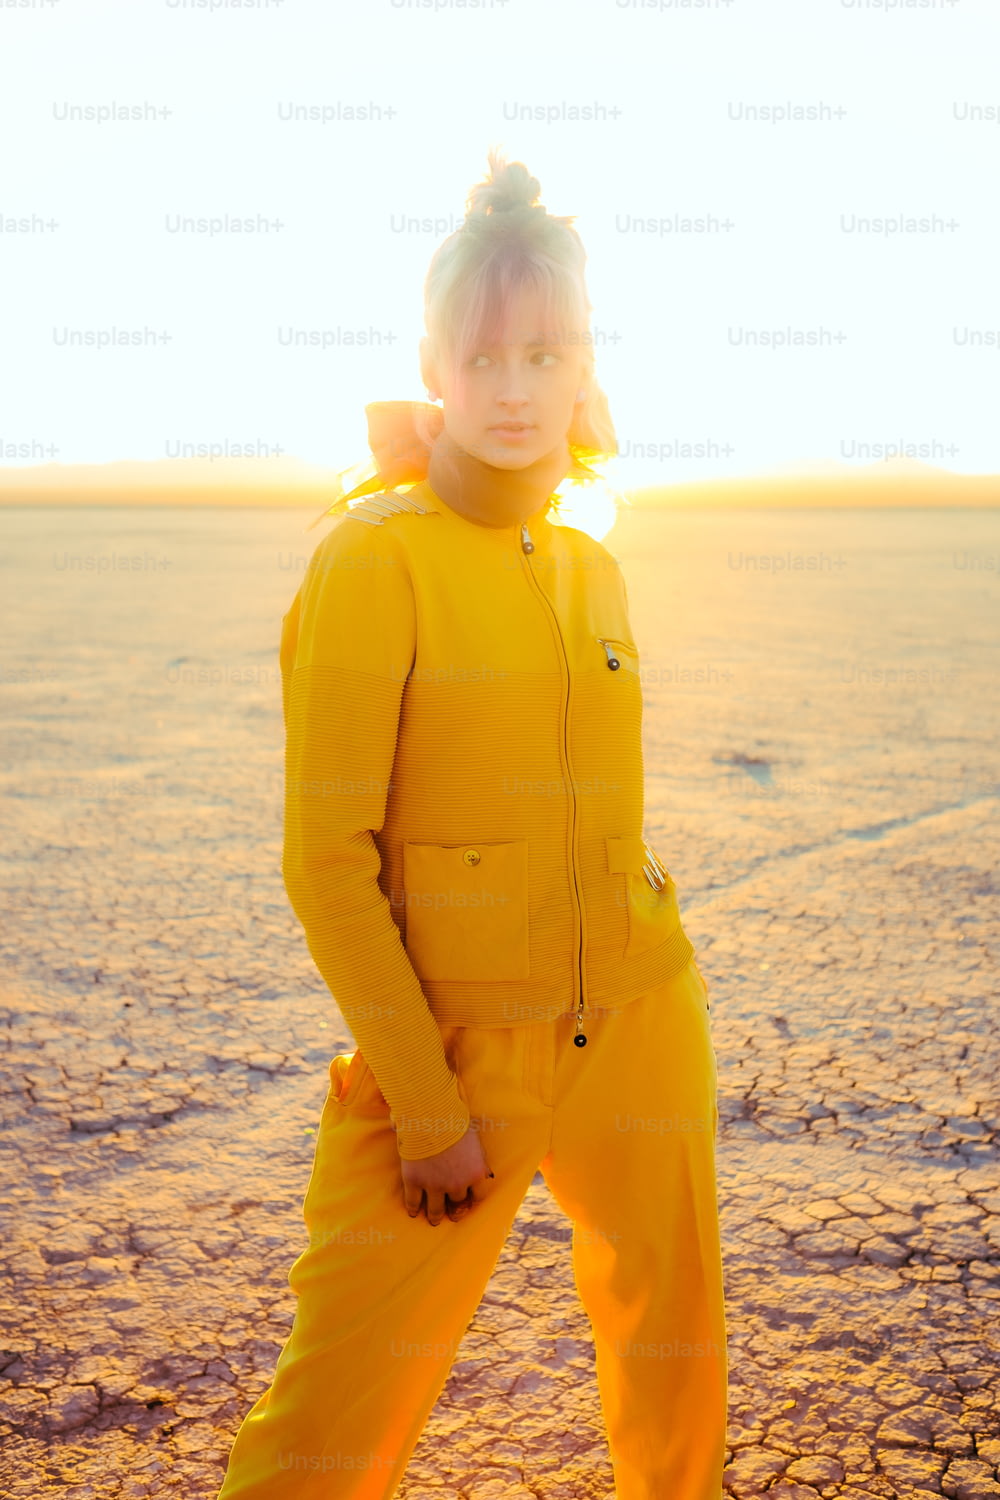 a person in a yellow suit standing in the desert